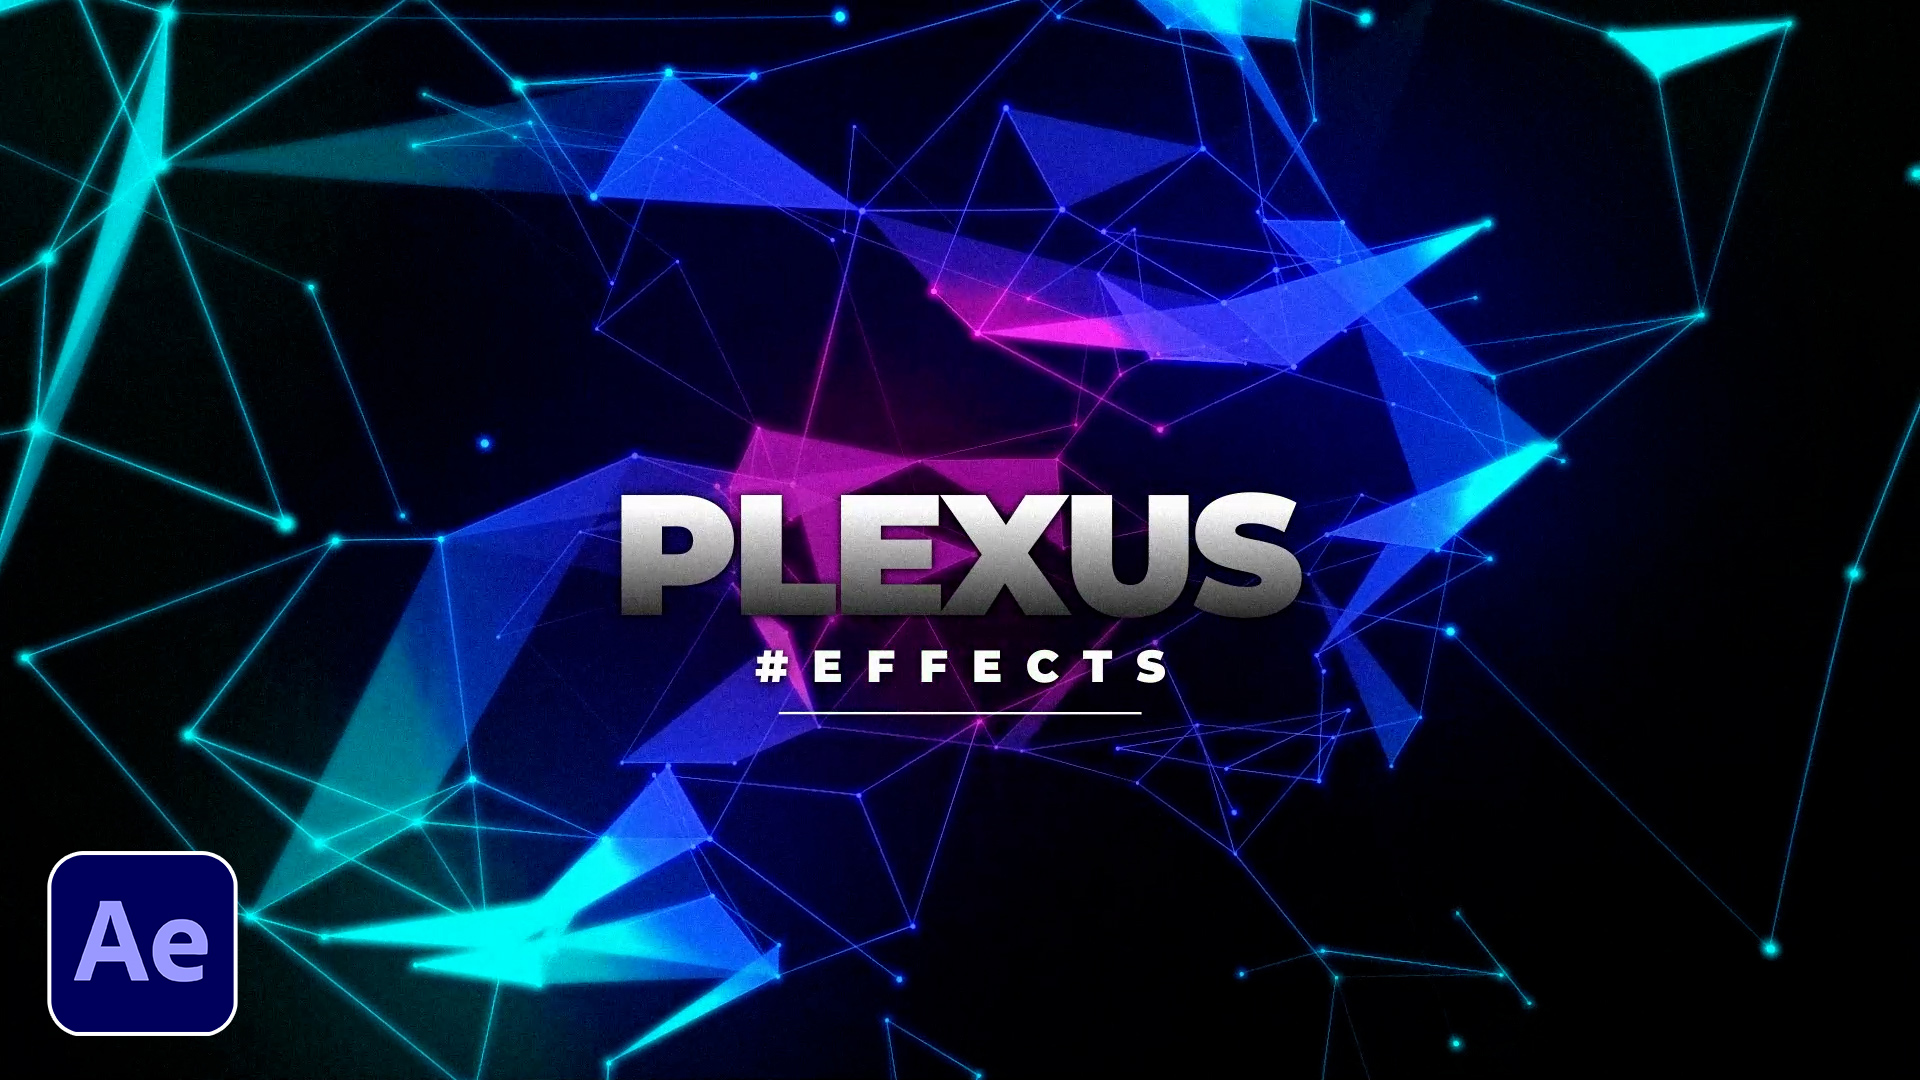 plexus after effects project download